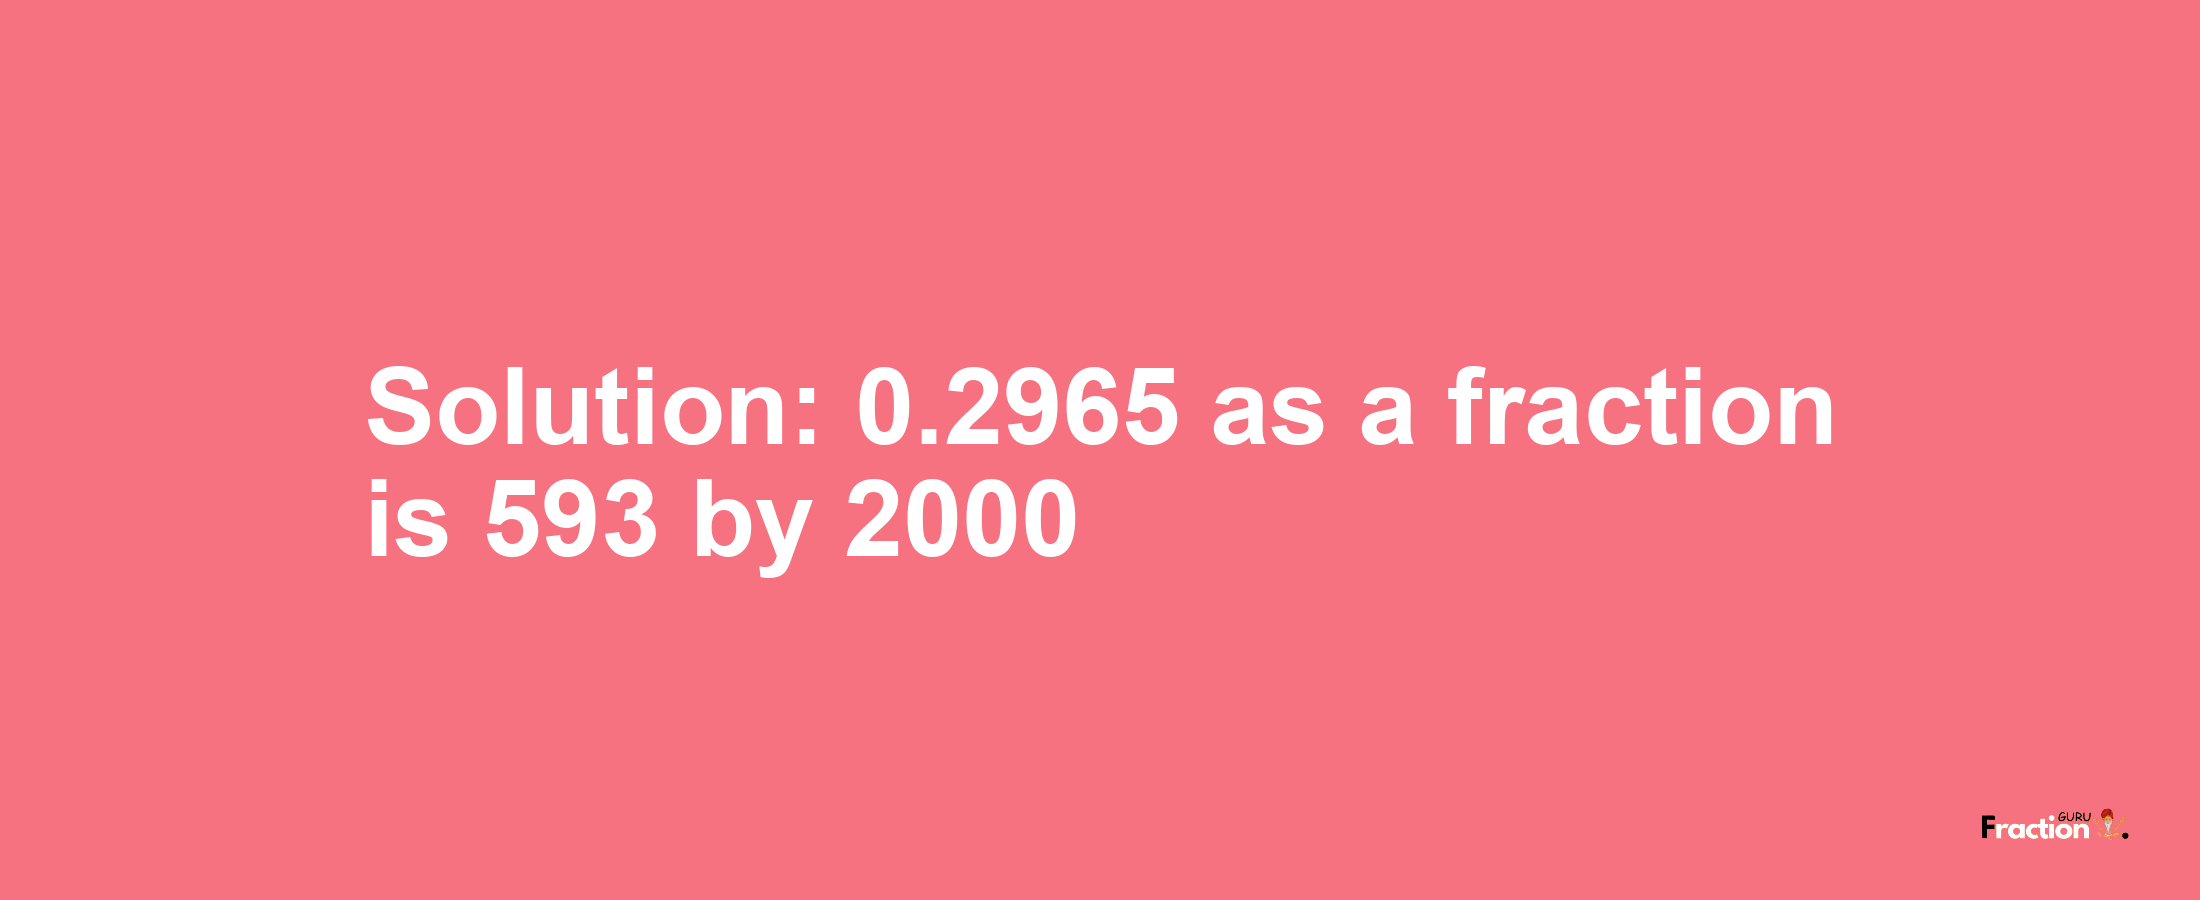 Solution:0.2965 as a fraction is 593/2000